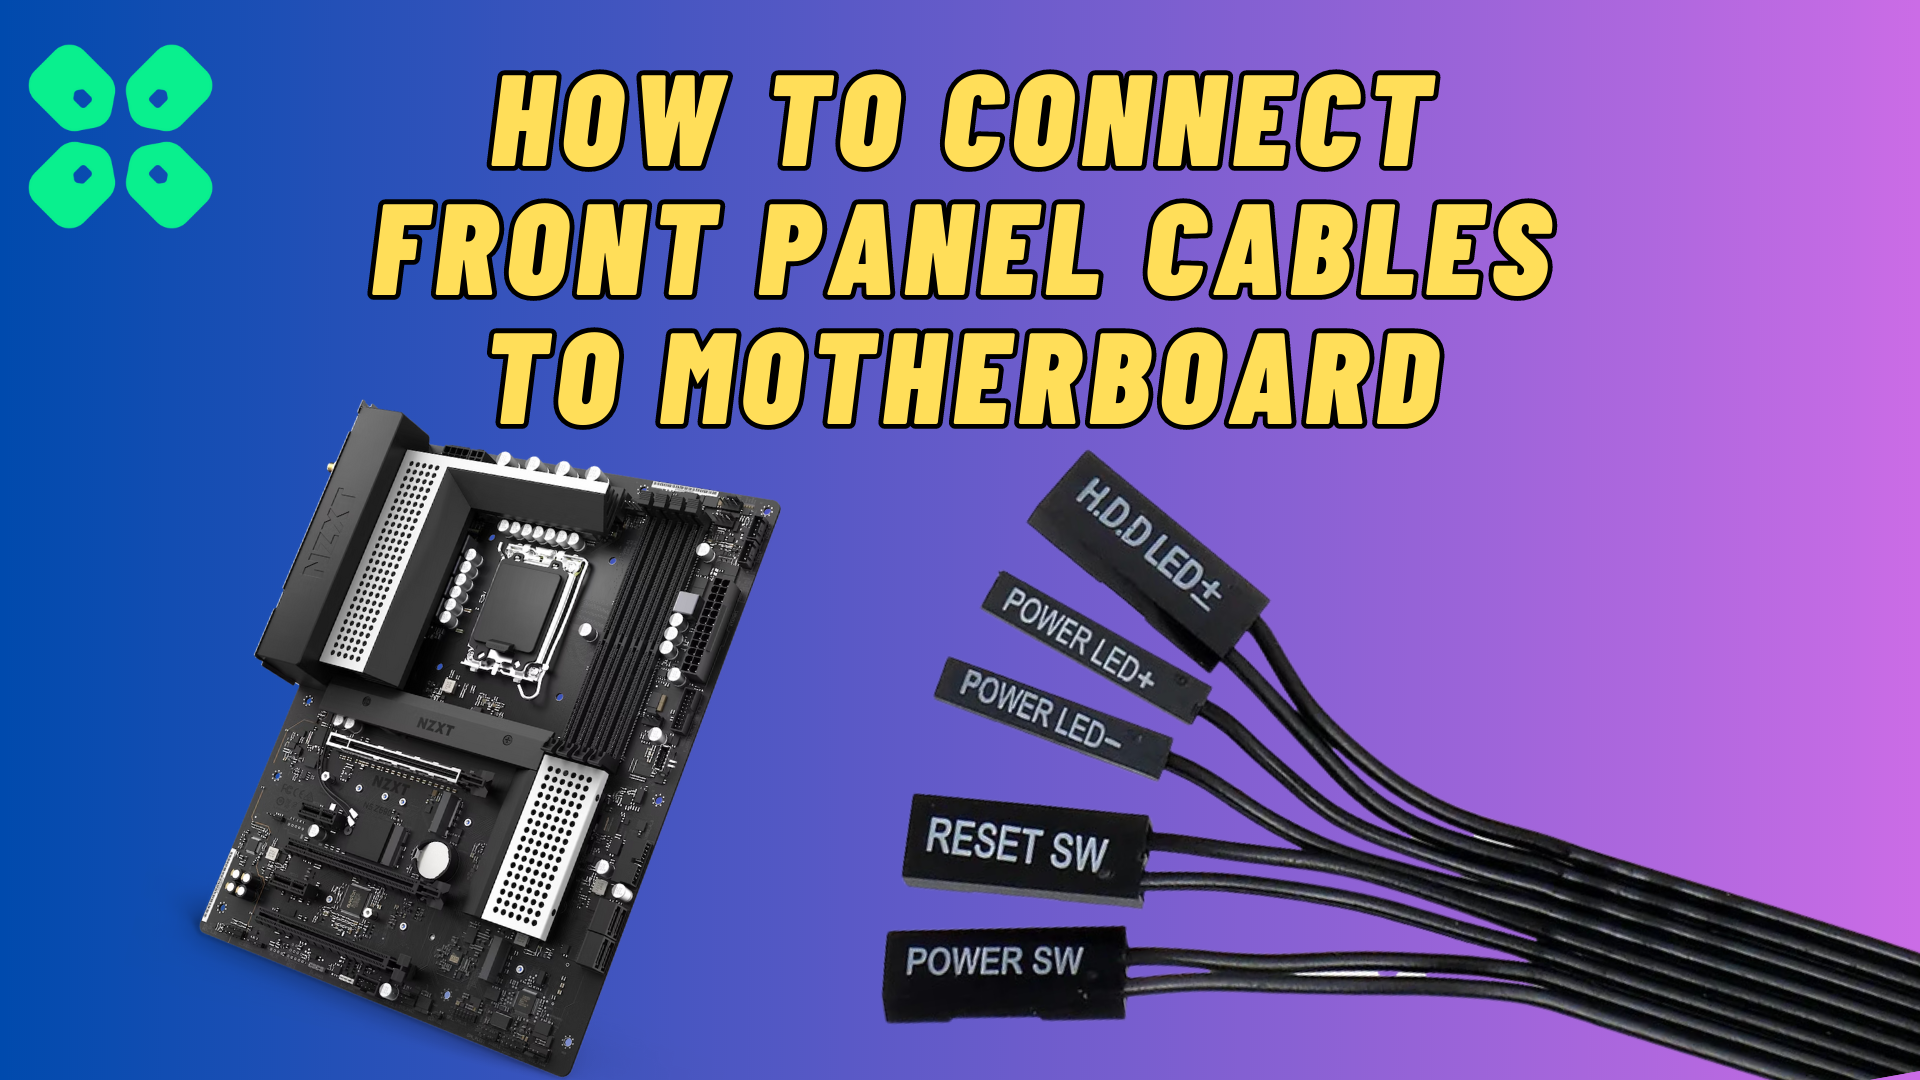 How to Connect Front Panel Cables with Motherboard